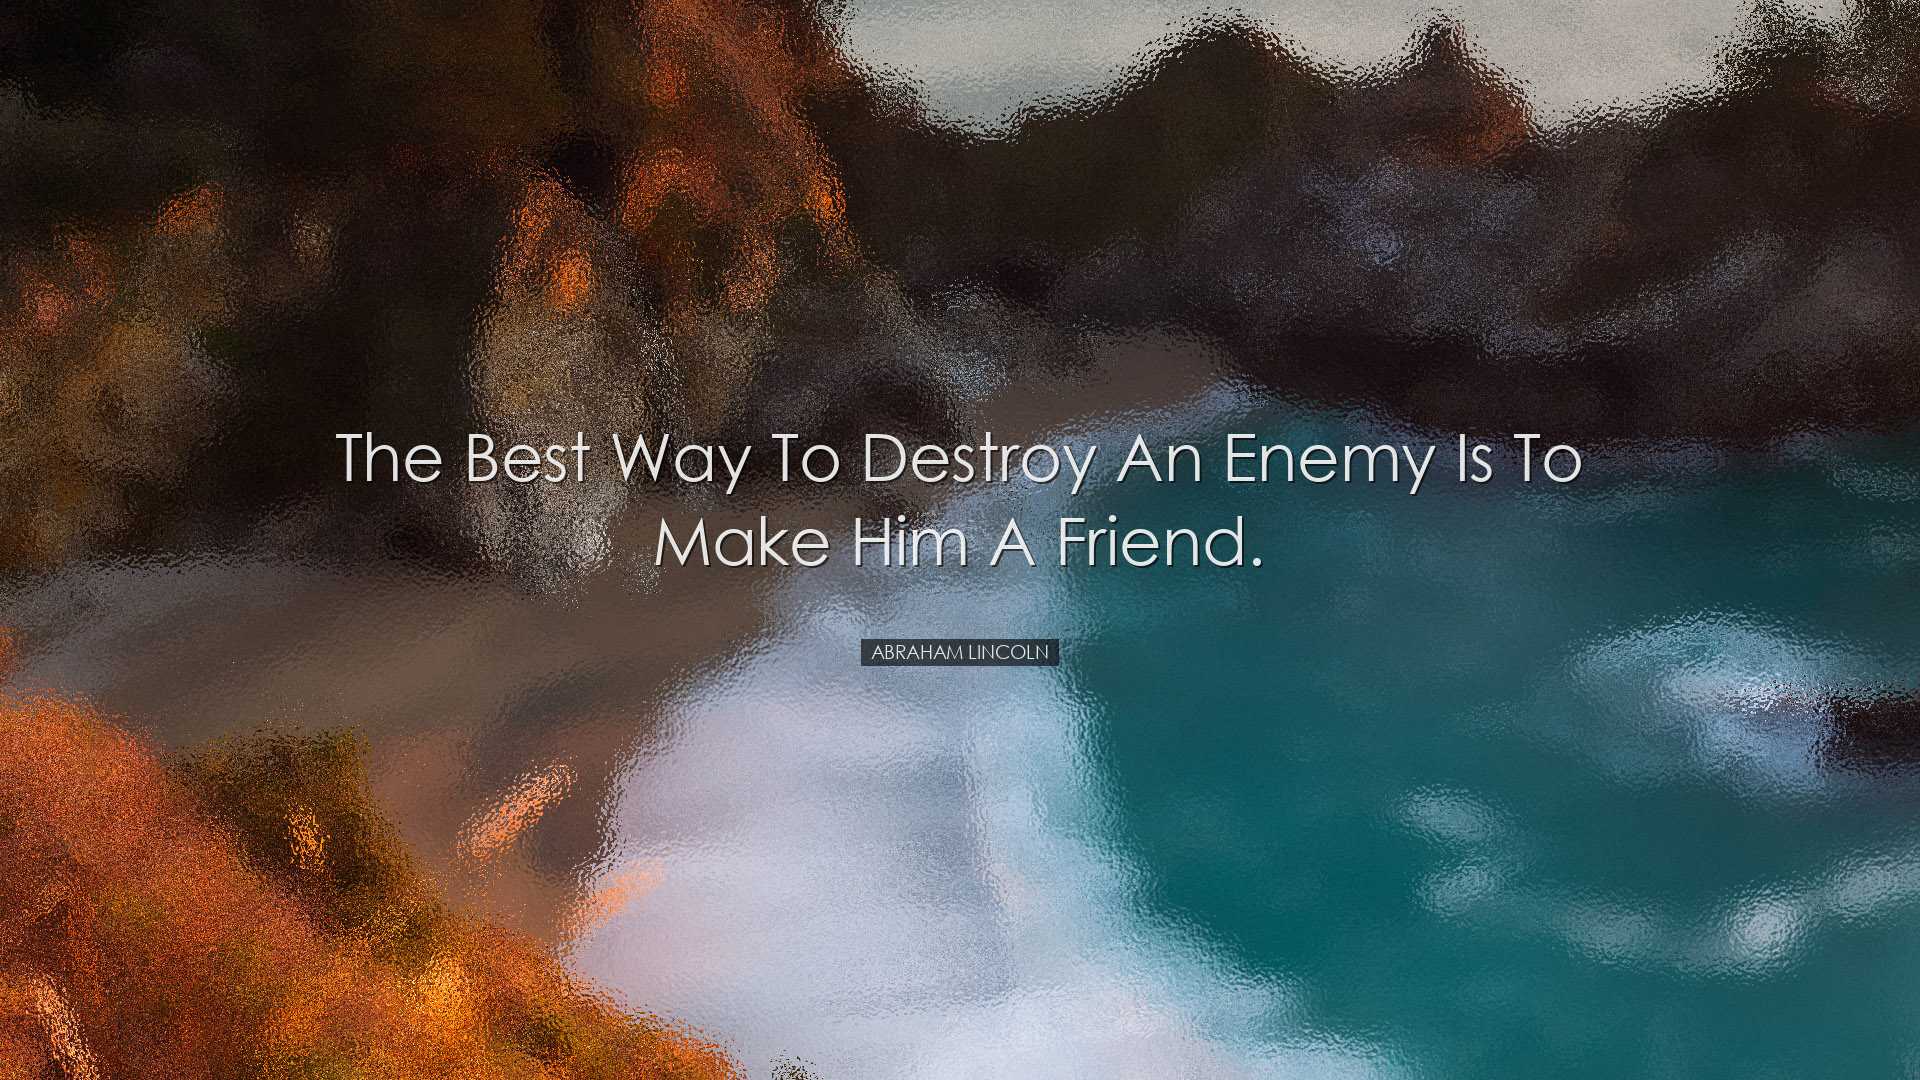 The best way to destroy an enemy is to make him a friend. - Abraha